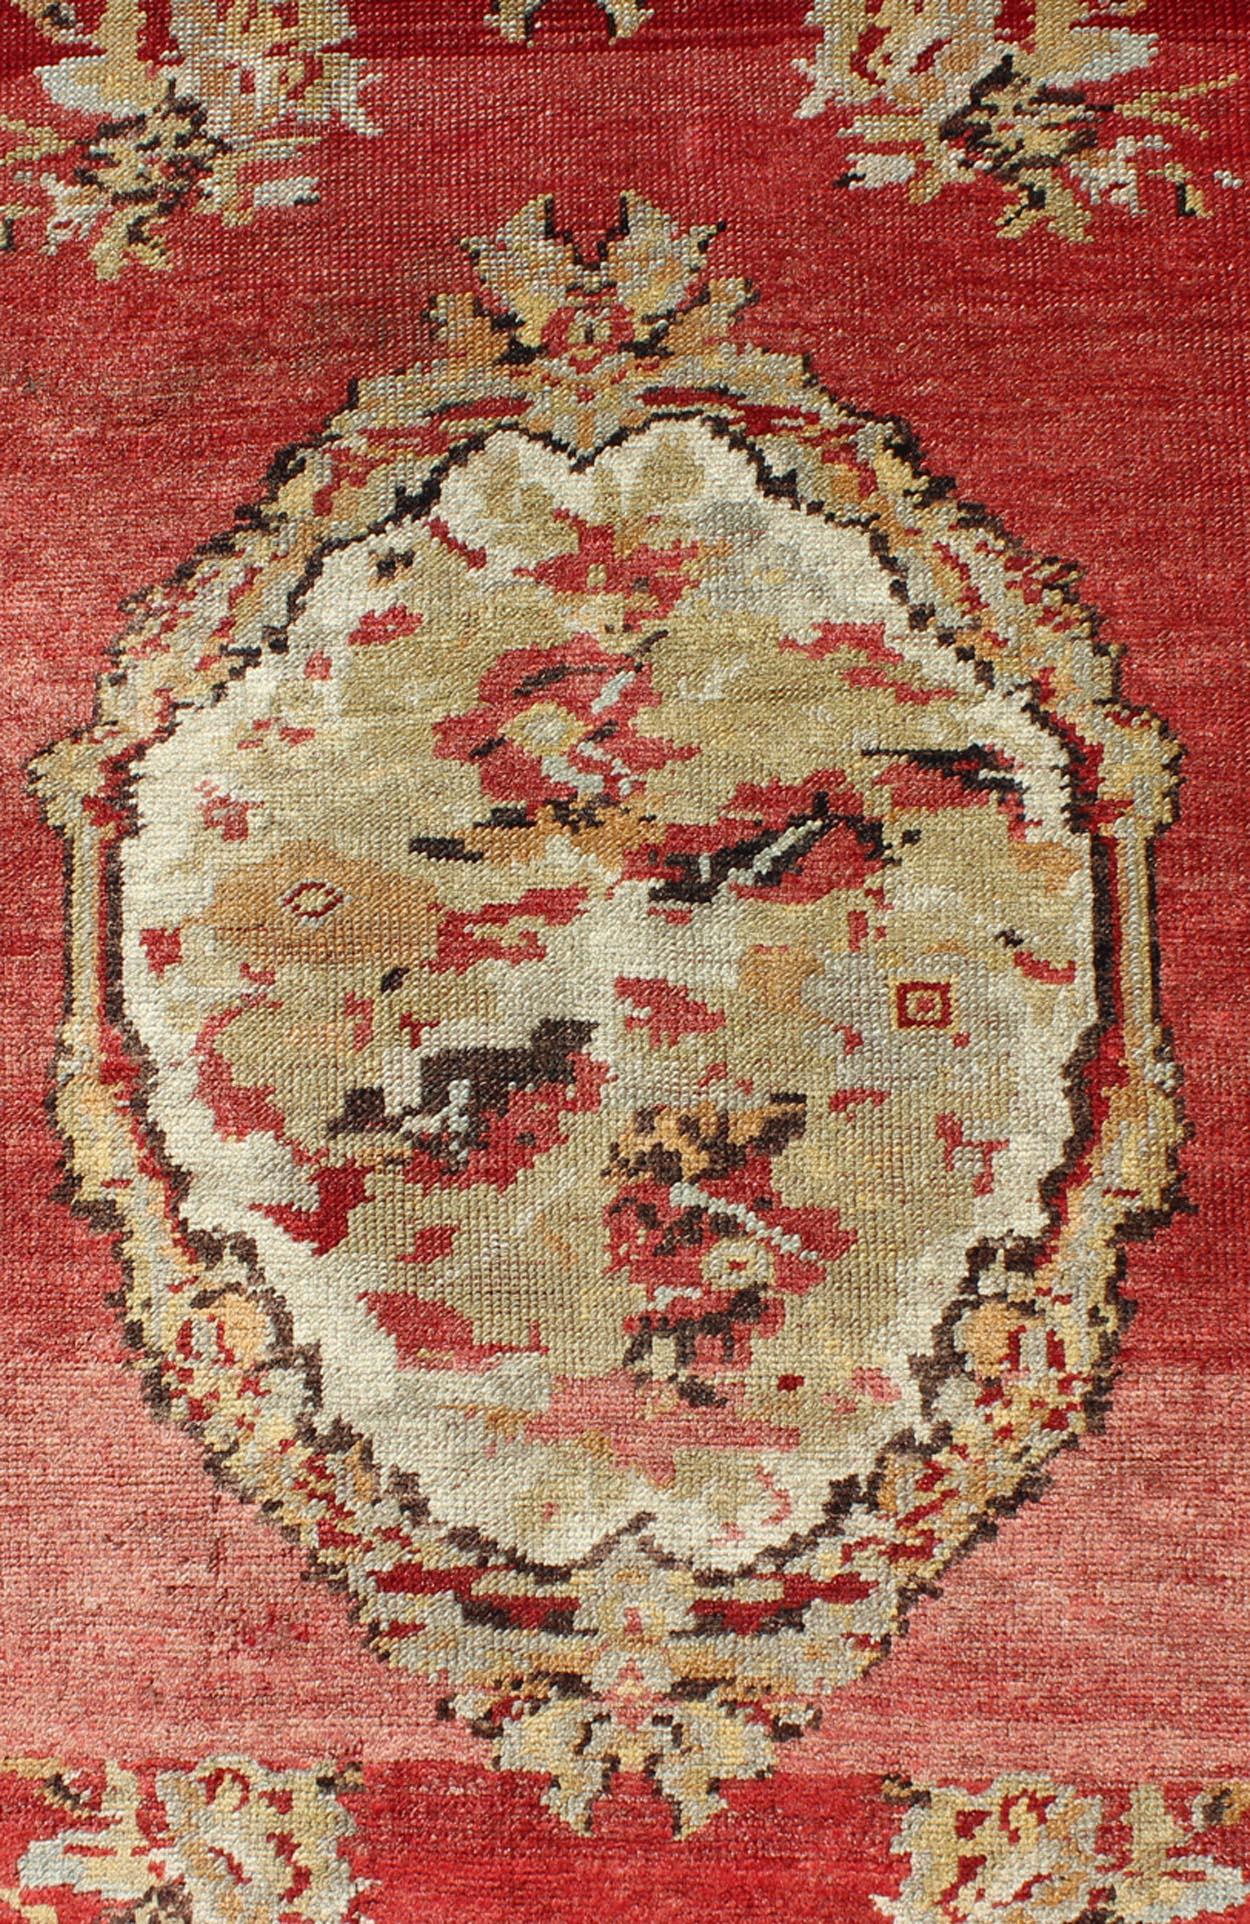 Antique Turkish Oushak Runner With European Design in Red, Brown and Green In Good Condition For Sale In Atlanta, GA